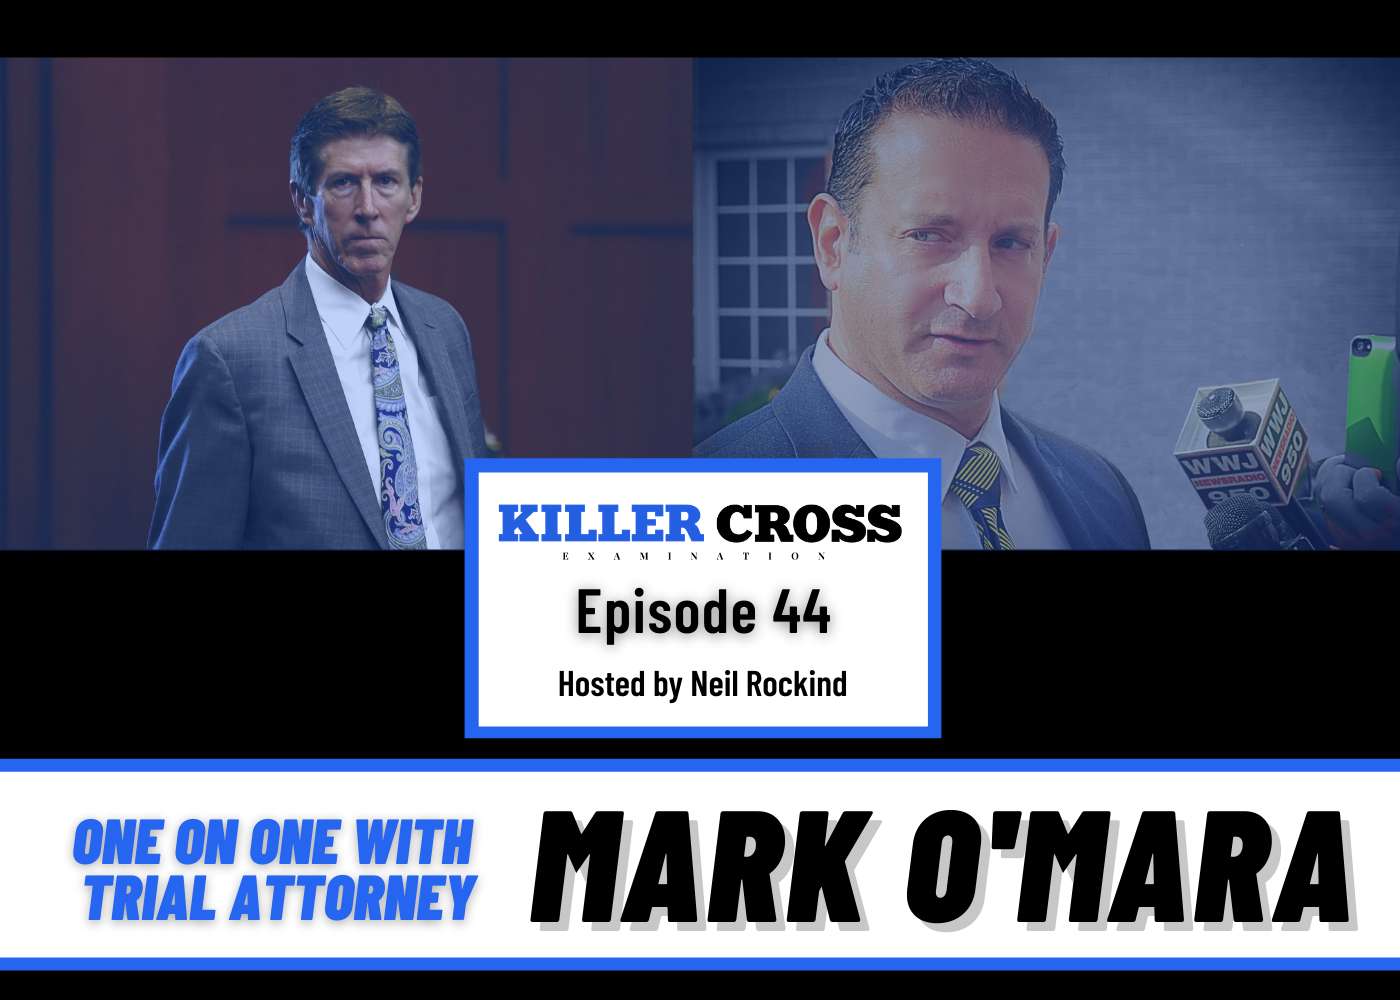 Episode 44: One on One with Trial Attorney- Mark O’Mara